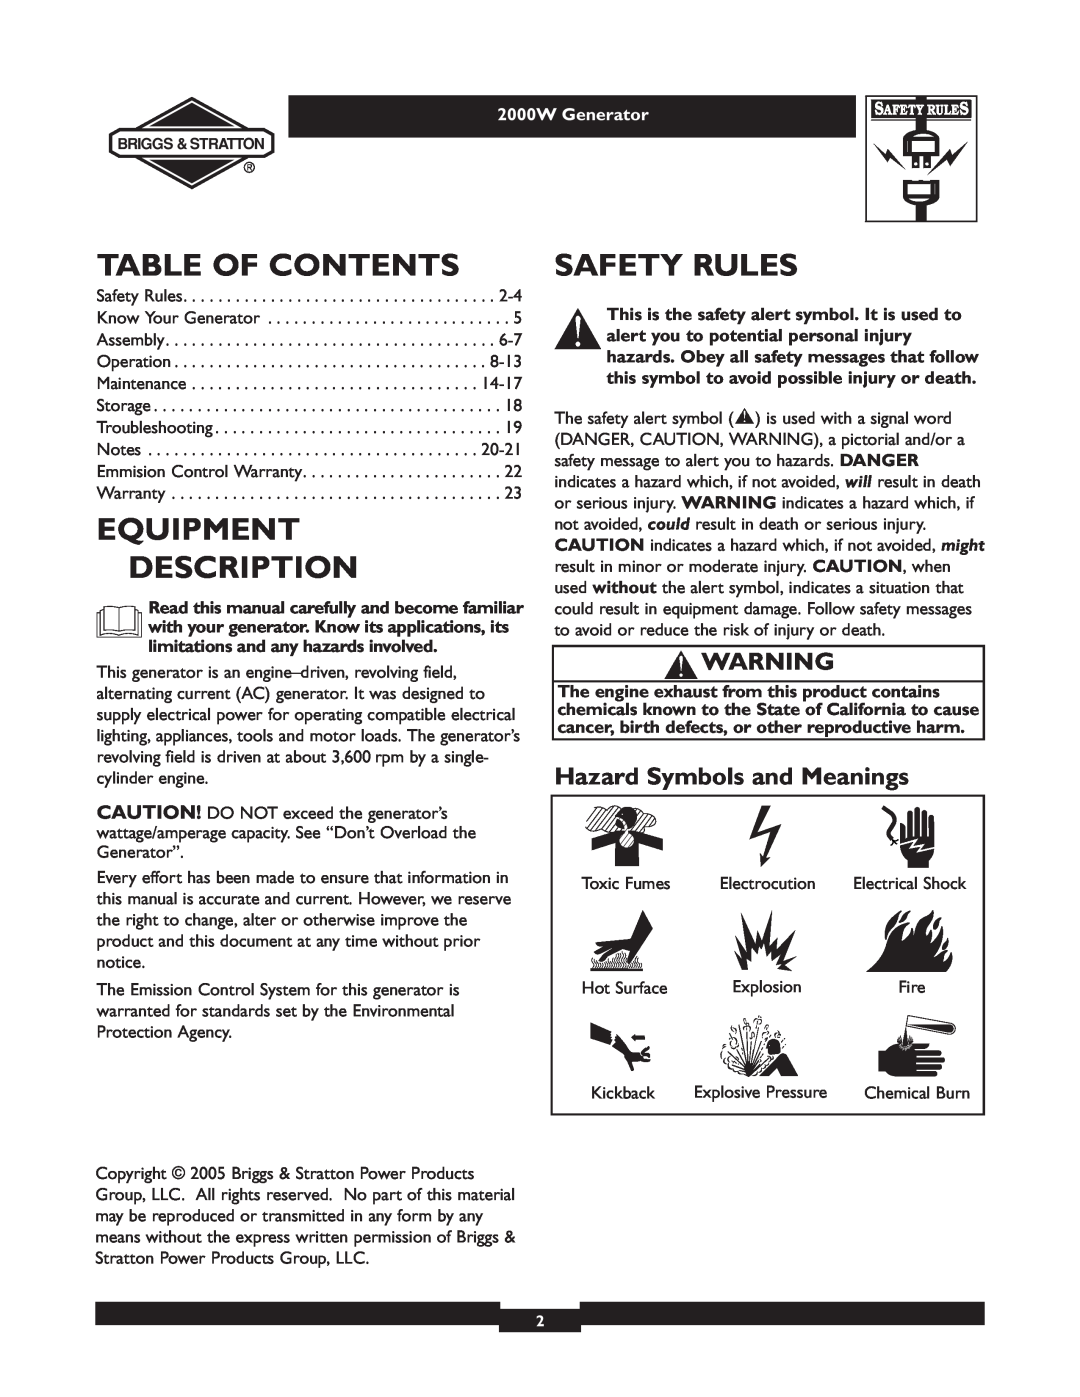 Briggs & Stratton 30239 owner manual Table Of Contents, Equipment Description, Safety Rules, Hazard Symbols and Meanings 